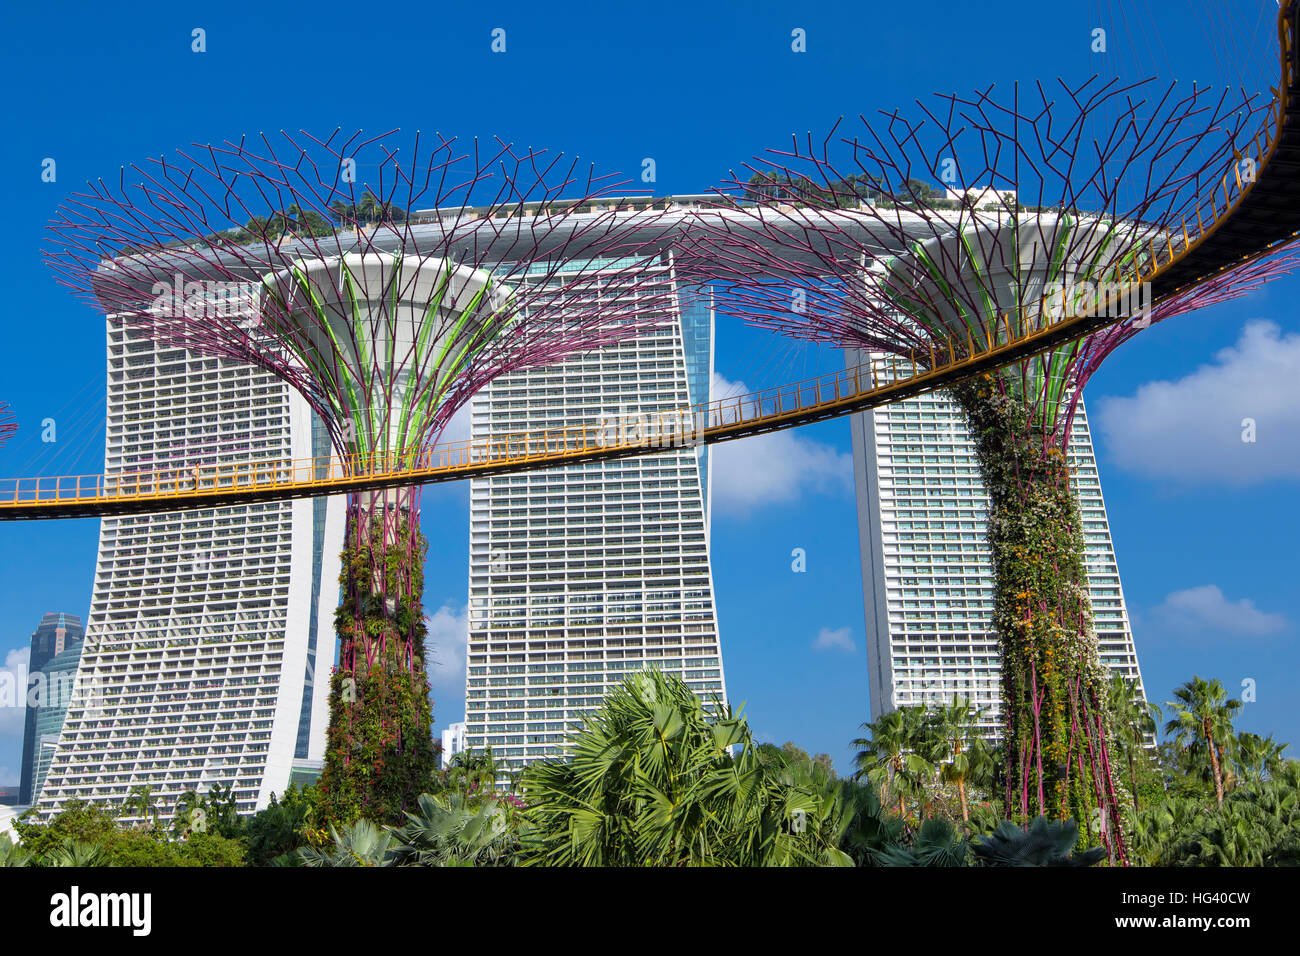 Gardens by the bay and Marina Bay Sands hotel, Singapore Stock Photo